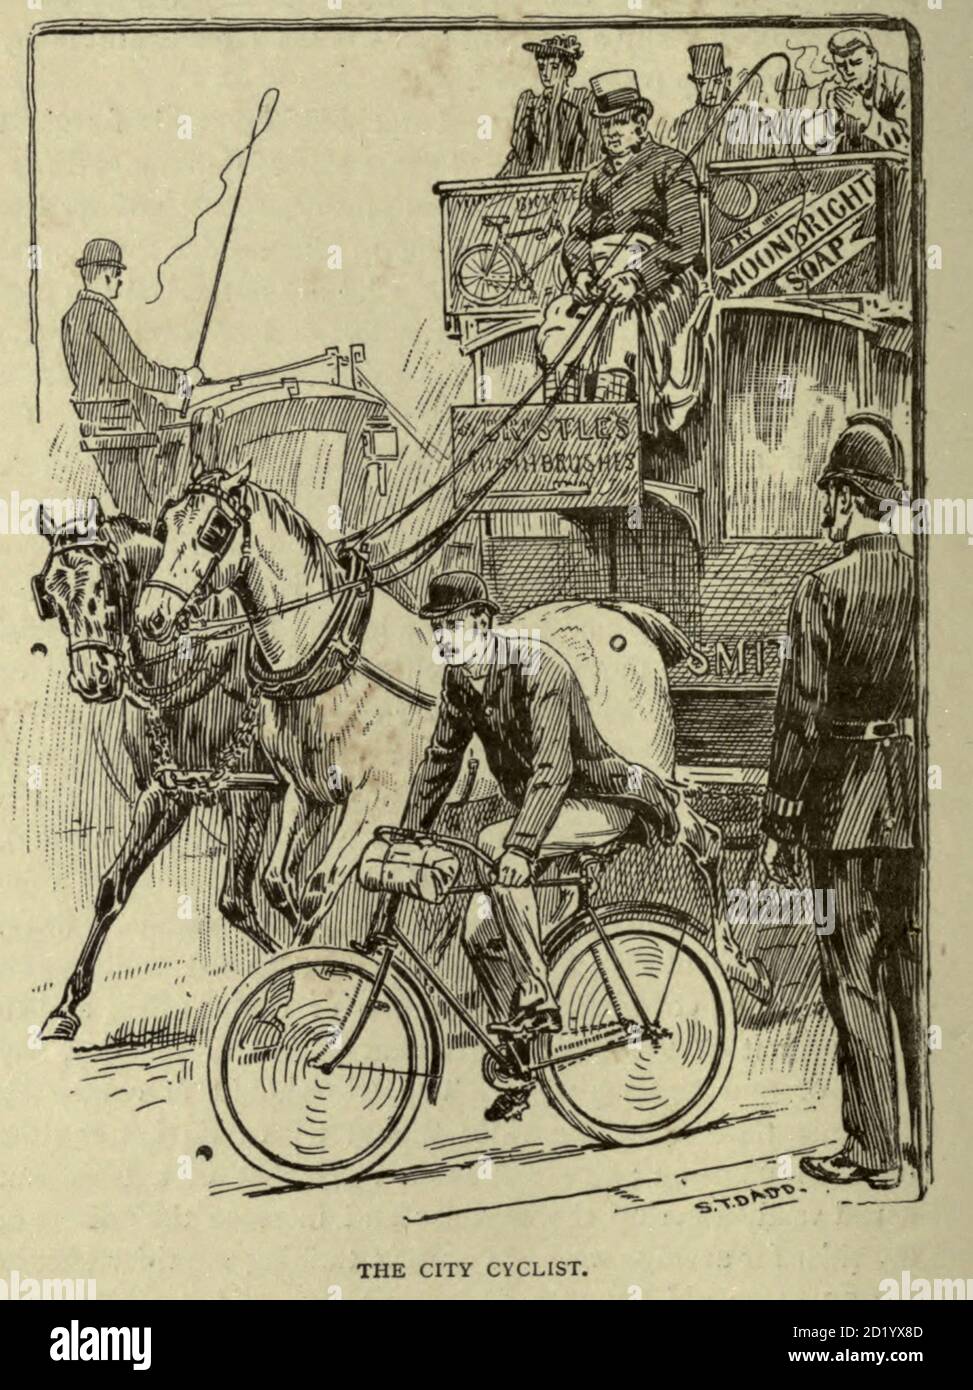 City cyclist 1896 from 'Cycling' by The right Hon. Earl of Albemarle, William Coutts Keppel, (1832-1894) and George Lacy Hillier (1856-1941); Joseph Pennell (1857-1926) Published by London and Bombay : Longmans, Green and co. in 1896. The Badminton Library [Not much has changes in the last 150 years] Stock Photo